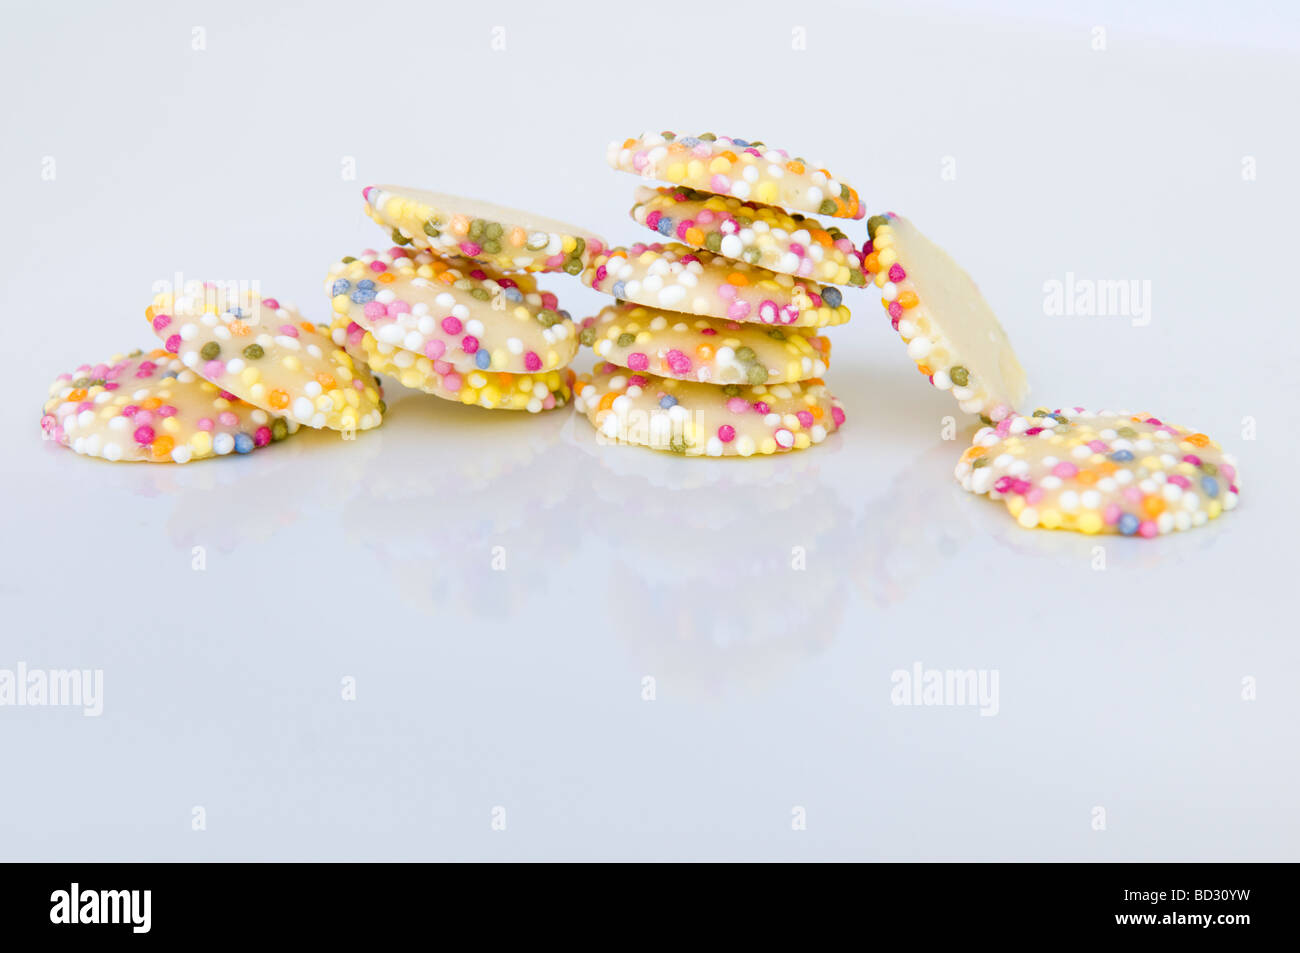 Still life shot of white chocolate button sweets covered in sprinkles taken against a white background with reflection Stock Photo